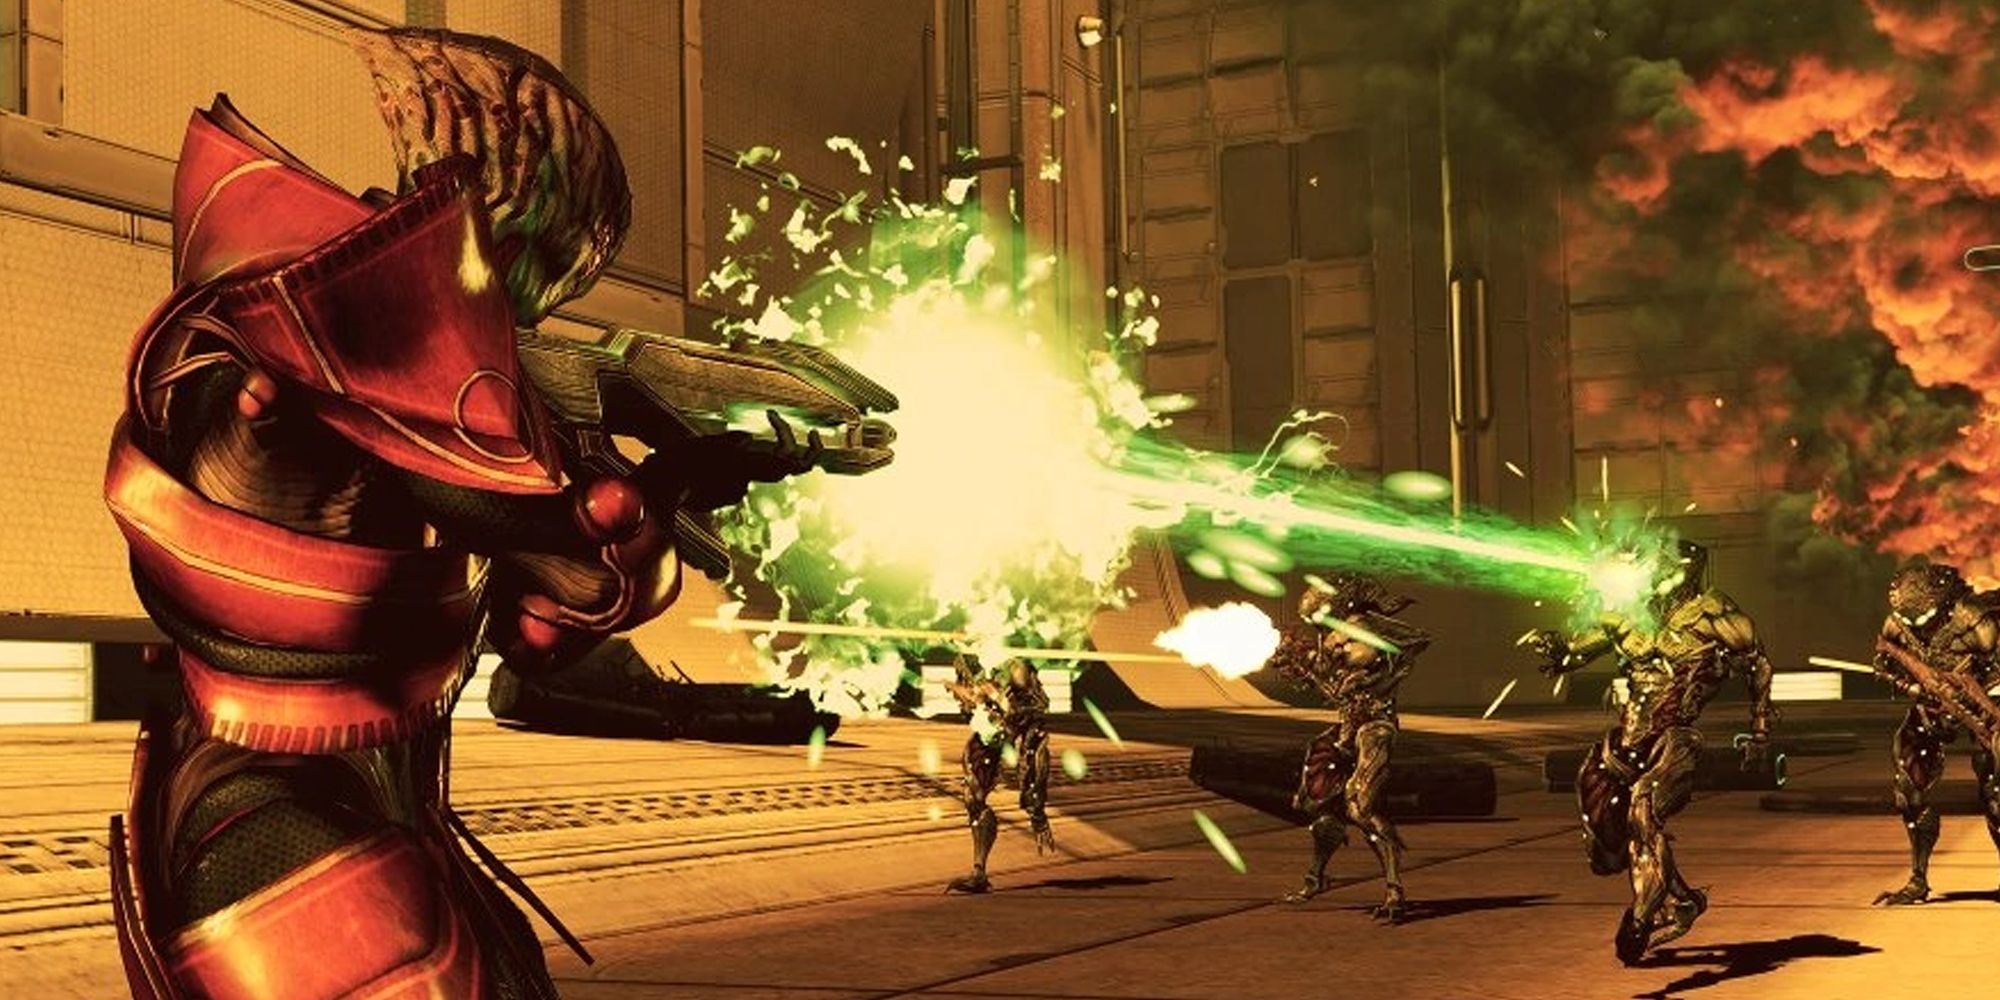 Javik is attacked by Collectors during a flashback in Mass Effect 3's From Ashes DLC.